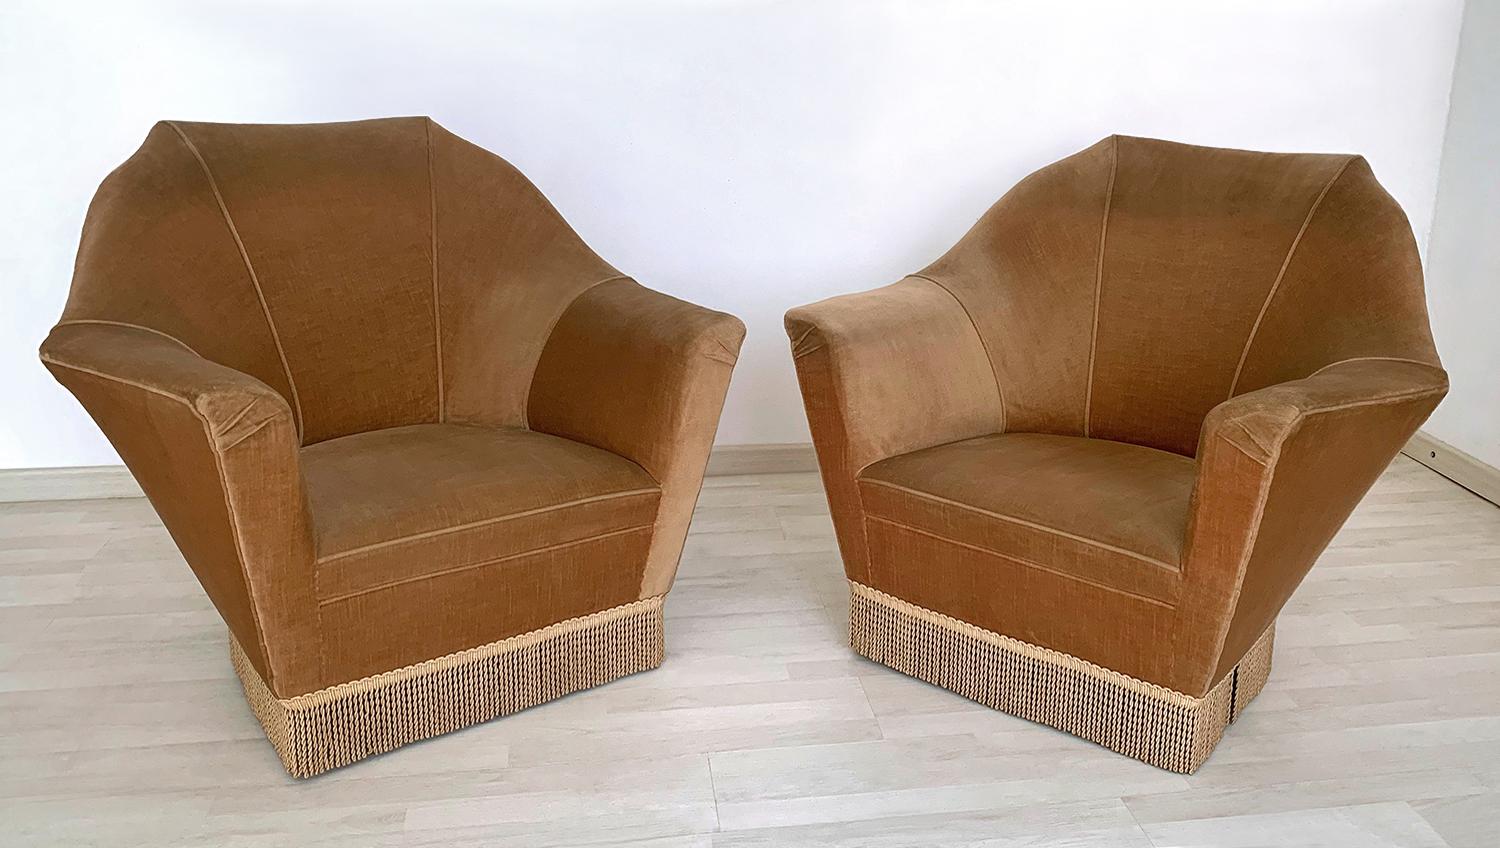 A pair of rare and iconic Italian Armchairs designed by Ico Parisi and produced by Ariberto Colombo in the 1950s.
The curves and pronounced lines of the design give the armchairs a modern and elegant look, with deep and very comfortable seats that